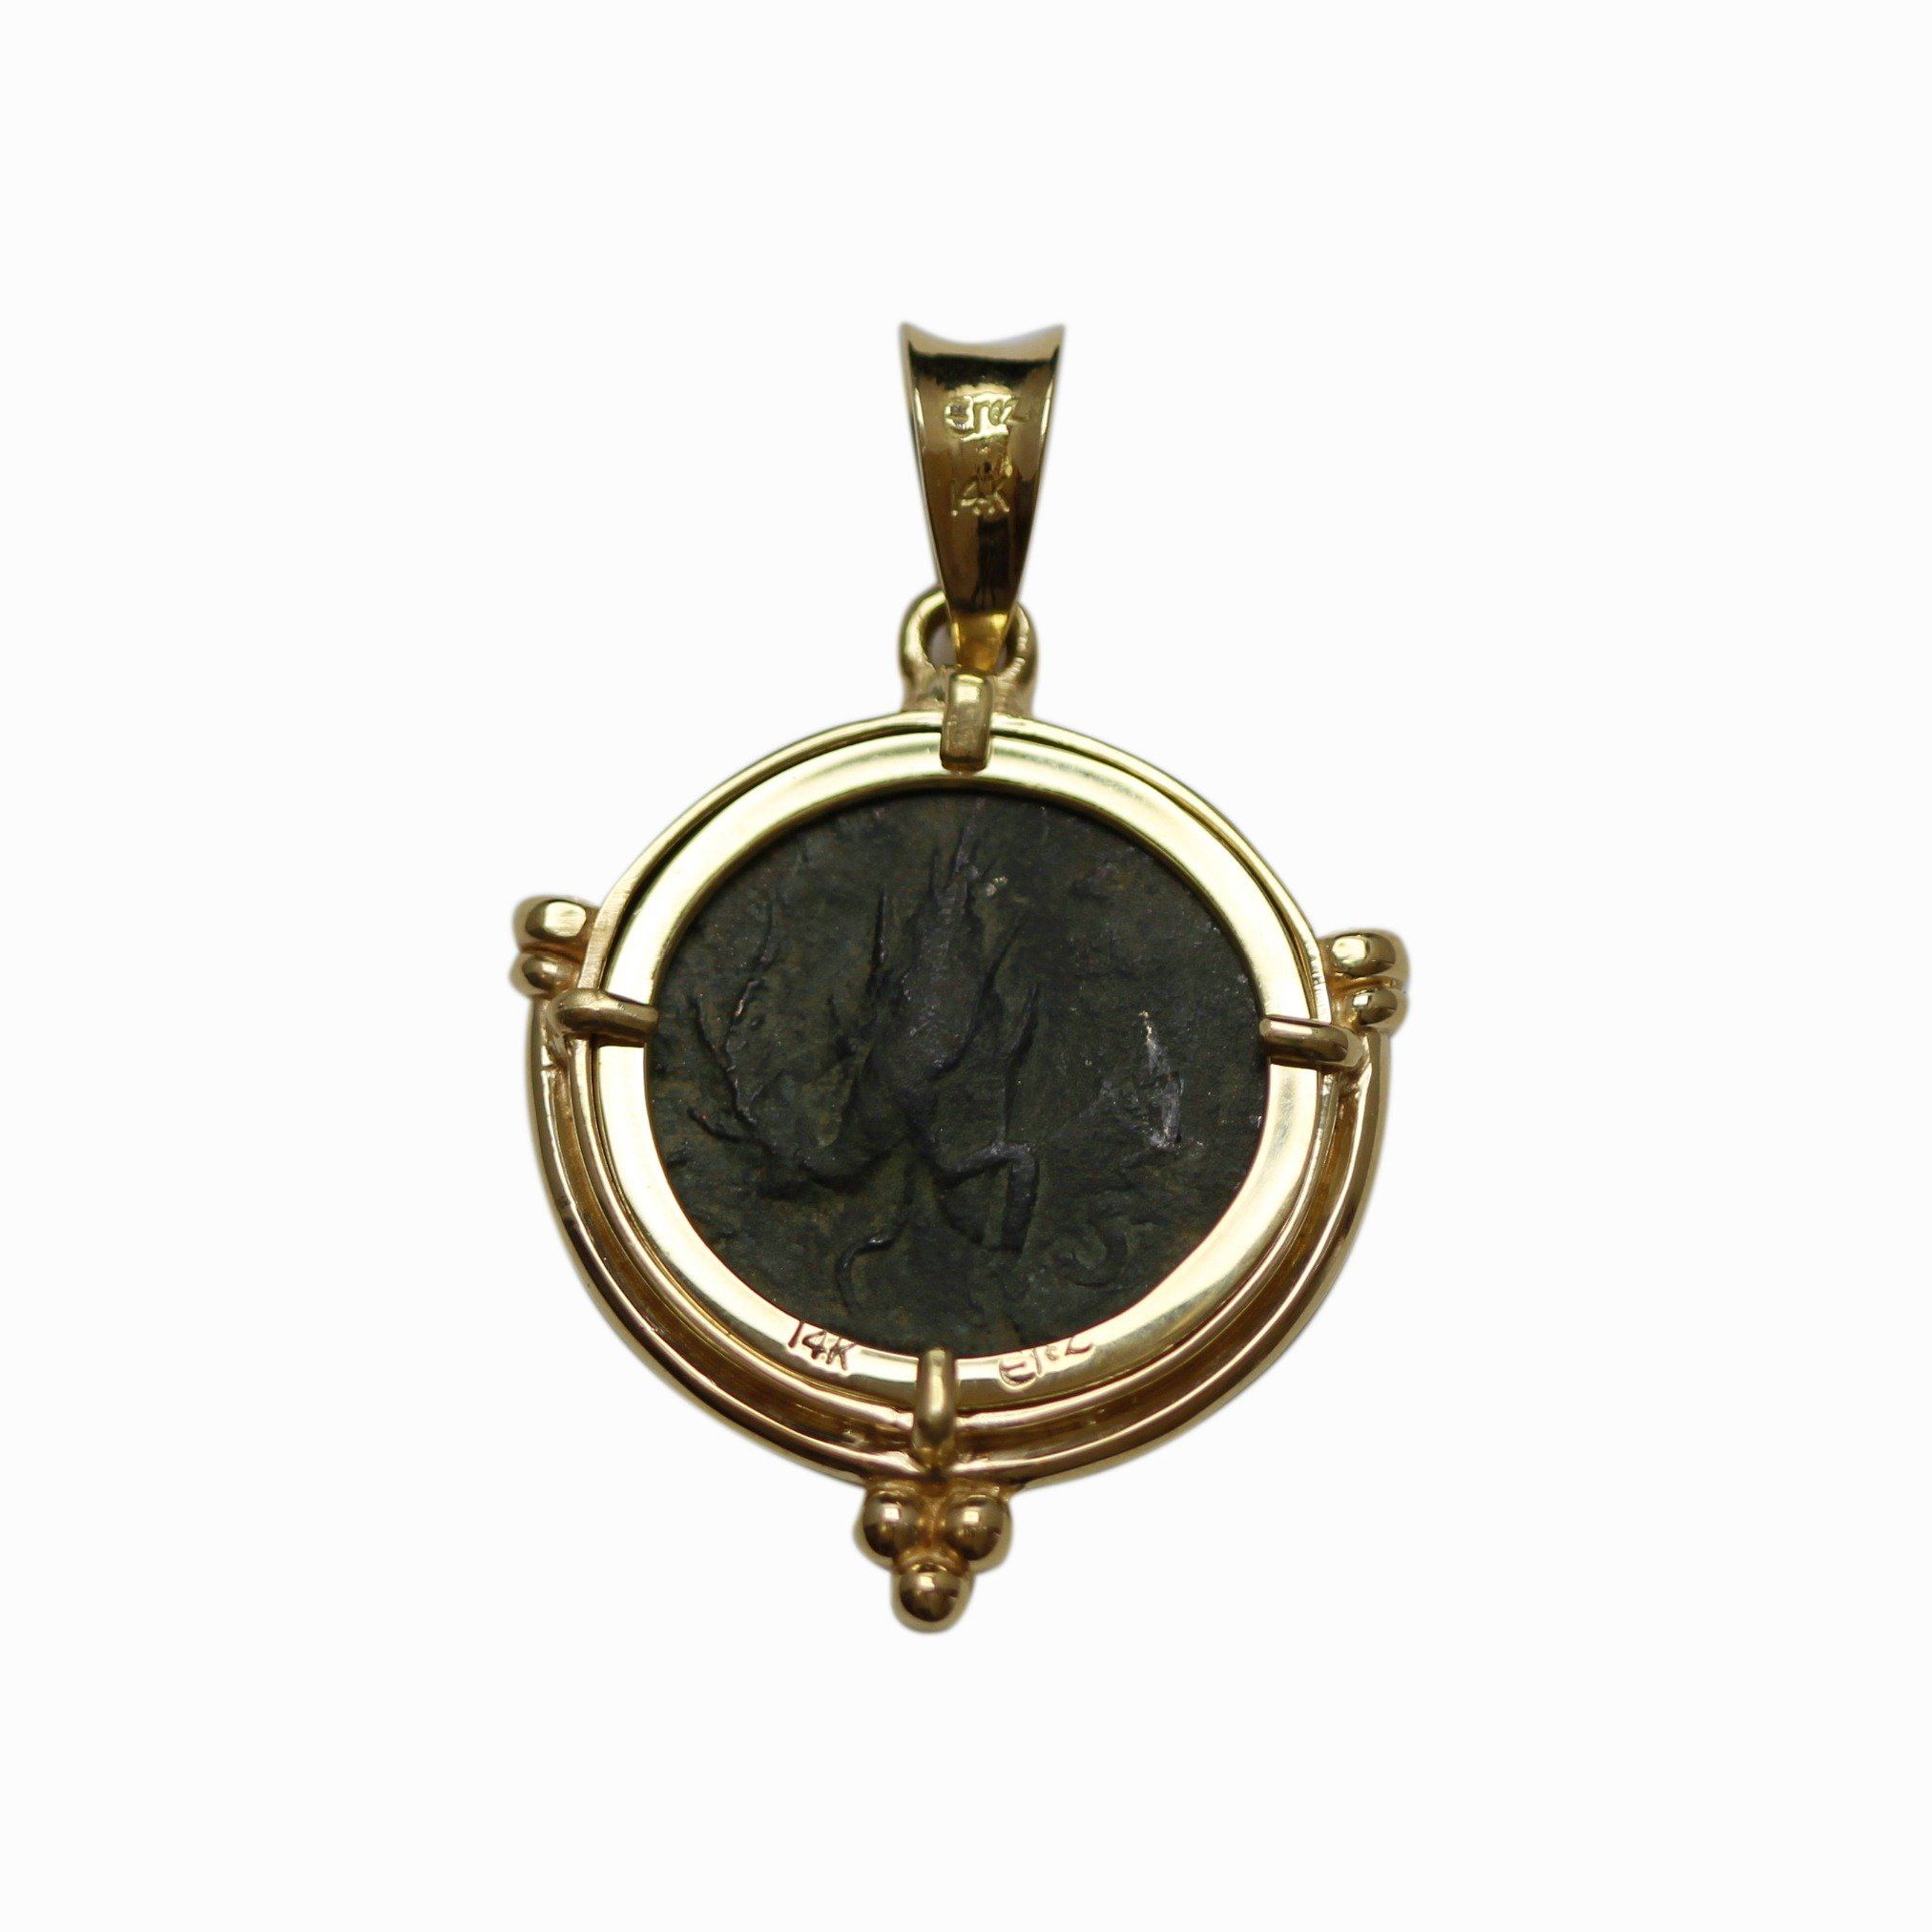 14K Gold Pendant, Bar Cochba, Shimon, Palm Tree, Ancient Jewish Coin, ID13279 - Erez Ancient Coin Jewelry 